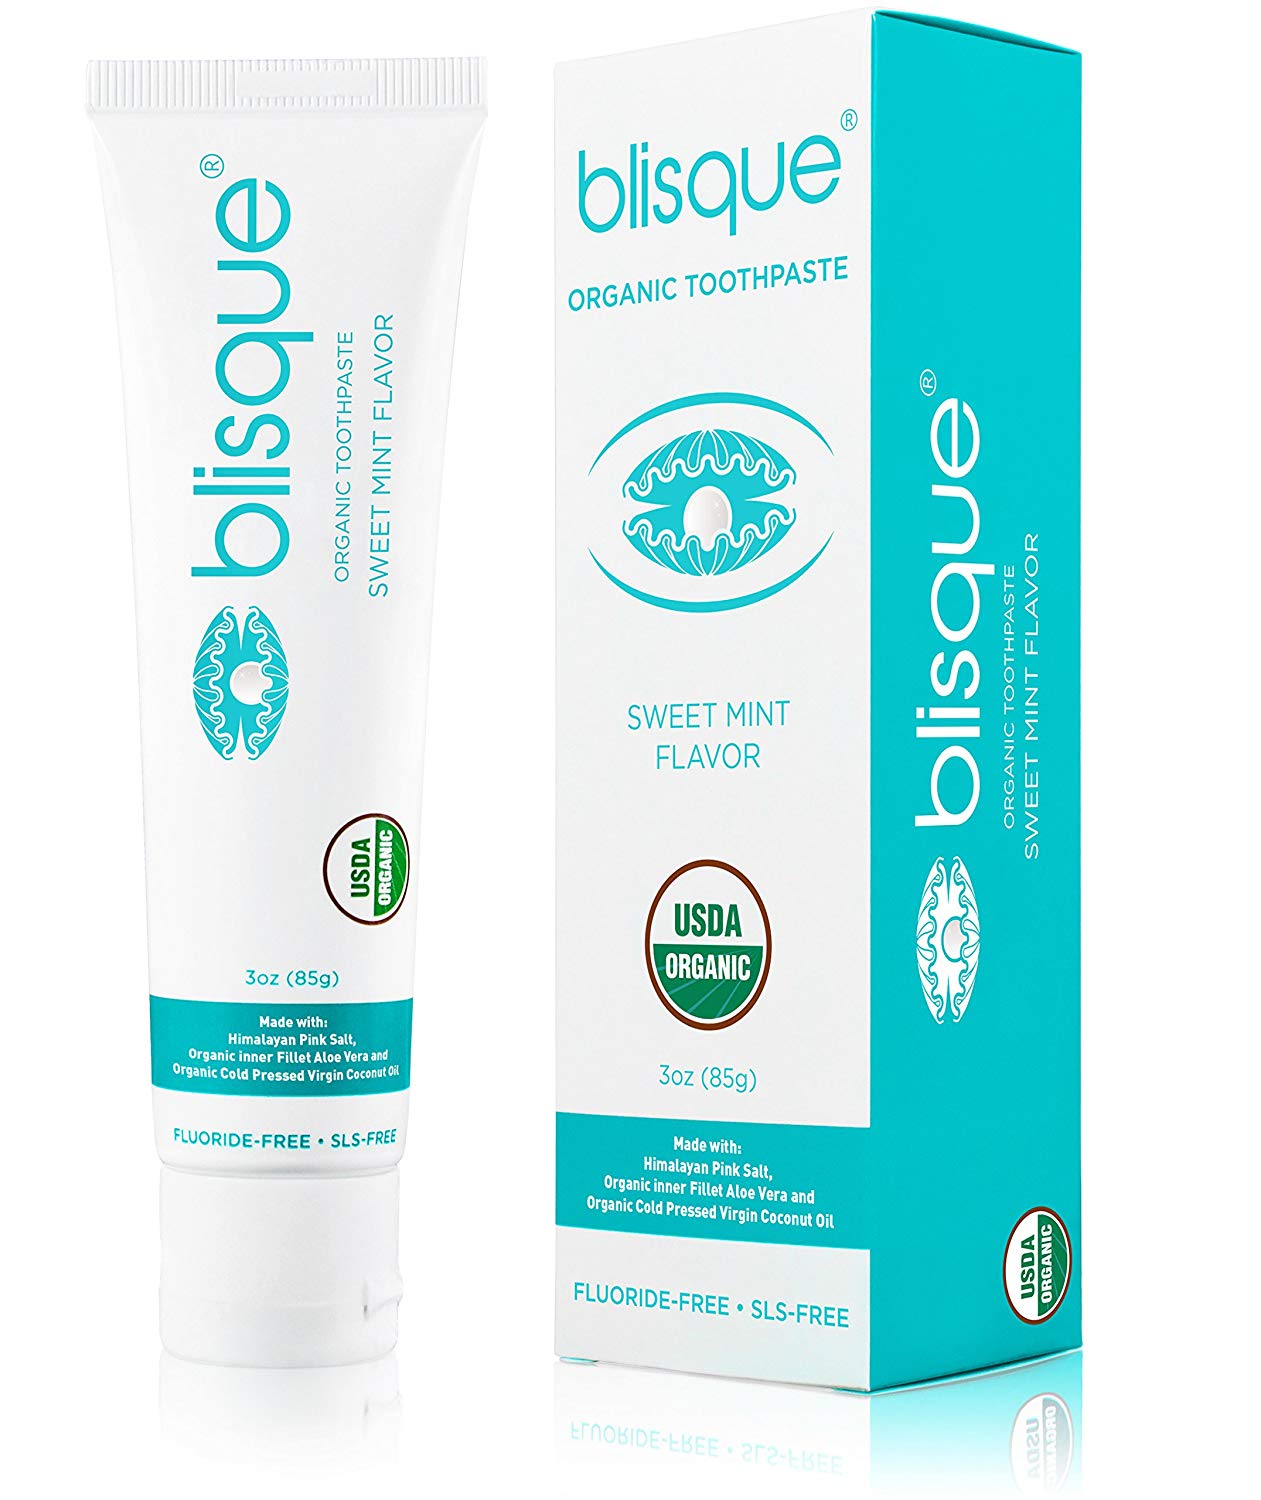 Organic Toothpaste - Sweet Mint Flavor (Organic, Natural, Non-toxic, Fluoride/SLS Free Toothpaste